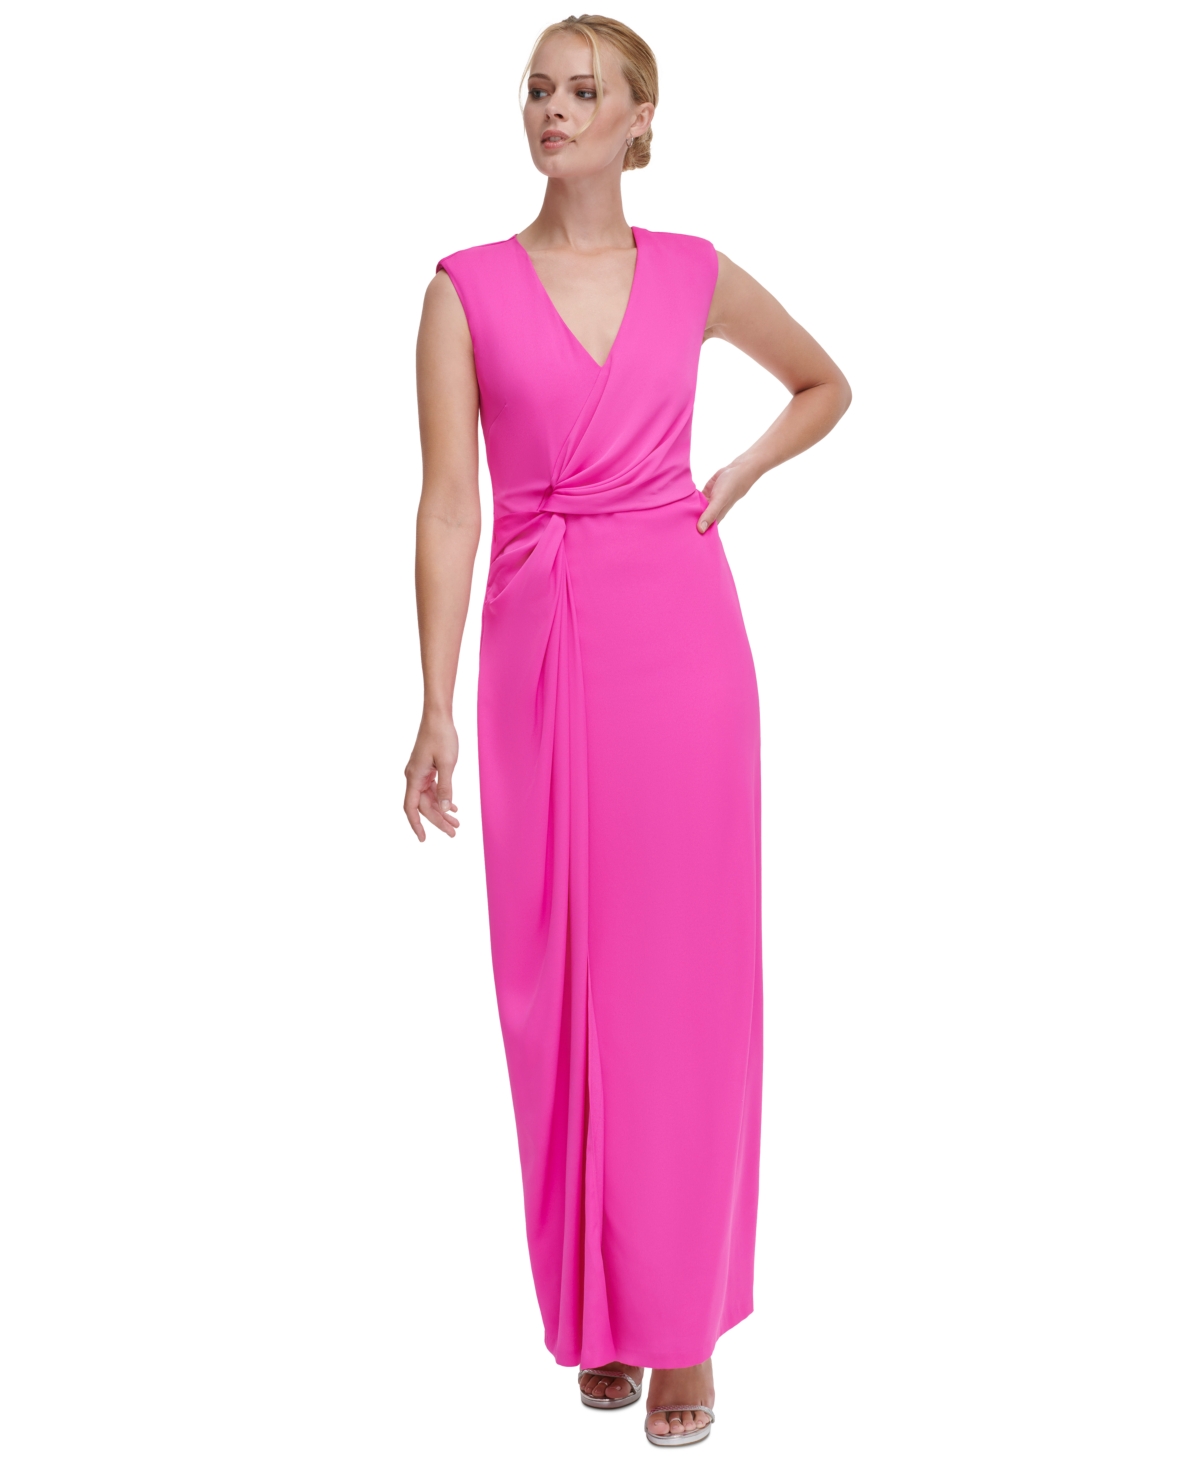 Women's V-Neck Side-Knot Sleeveless Gown - Power Pink